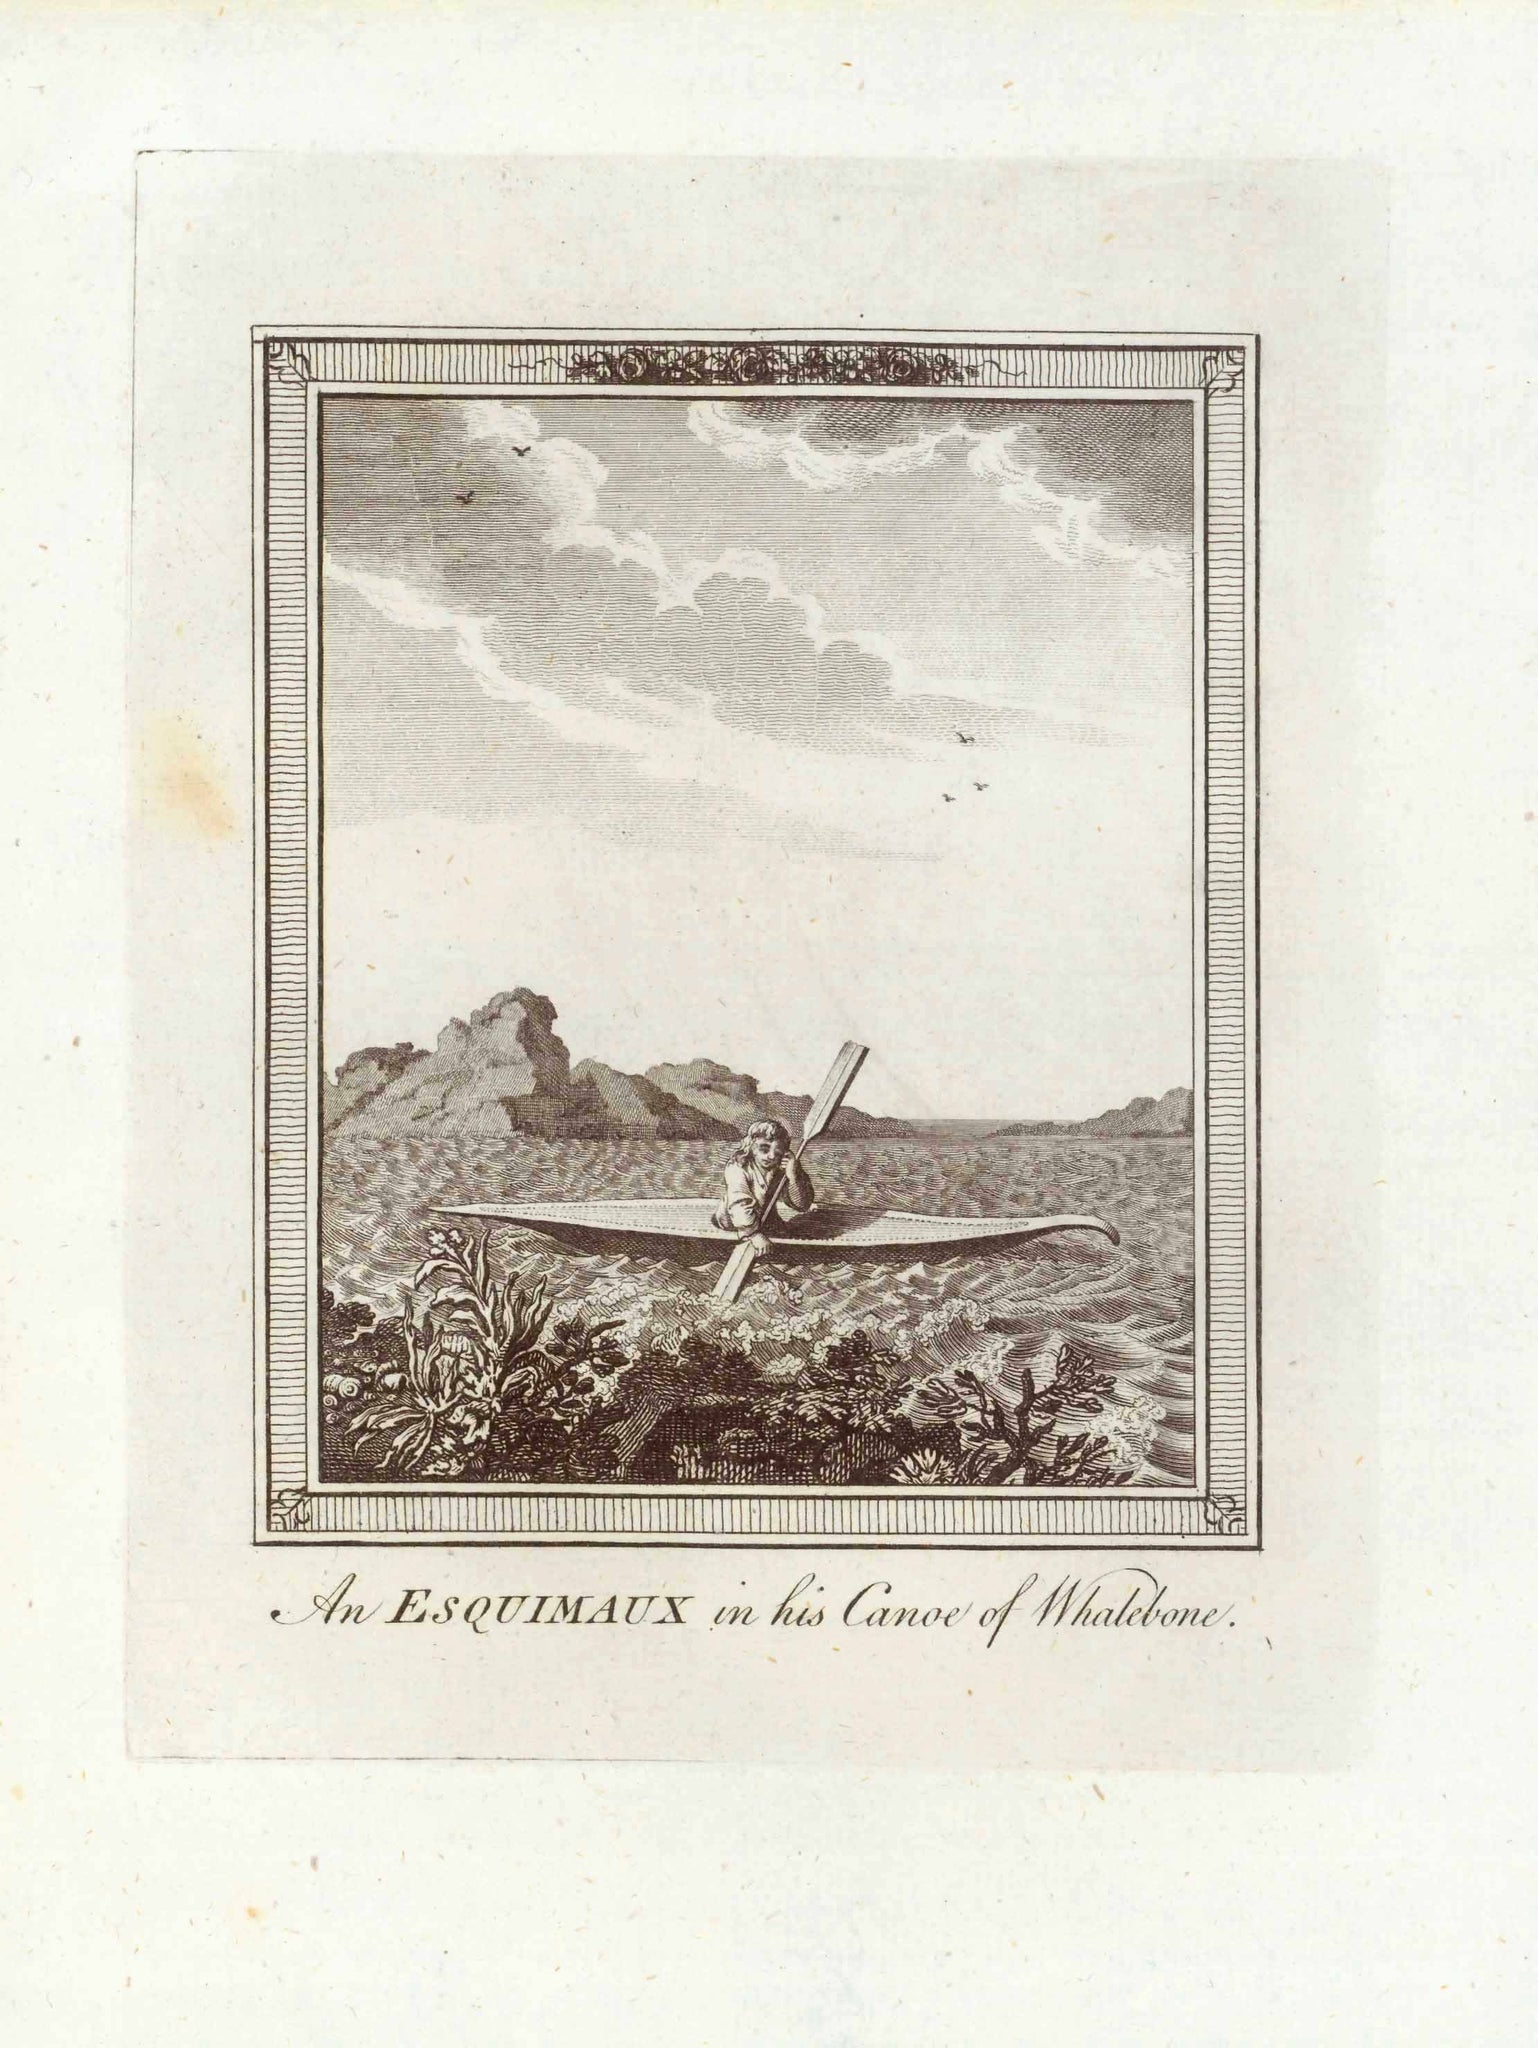 "An Esquimaux in his Canoe of Whalebone"  Copper engraving by Jean-Nicolas Bellin ca 1760.  Original antique print    Inuit, Esquimaux Eskimo, Whalebone, Jagd, Chasse, Hunting